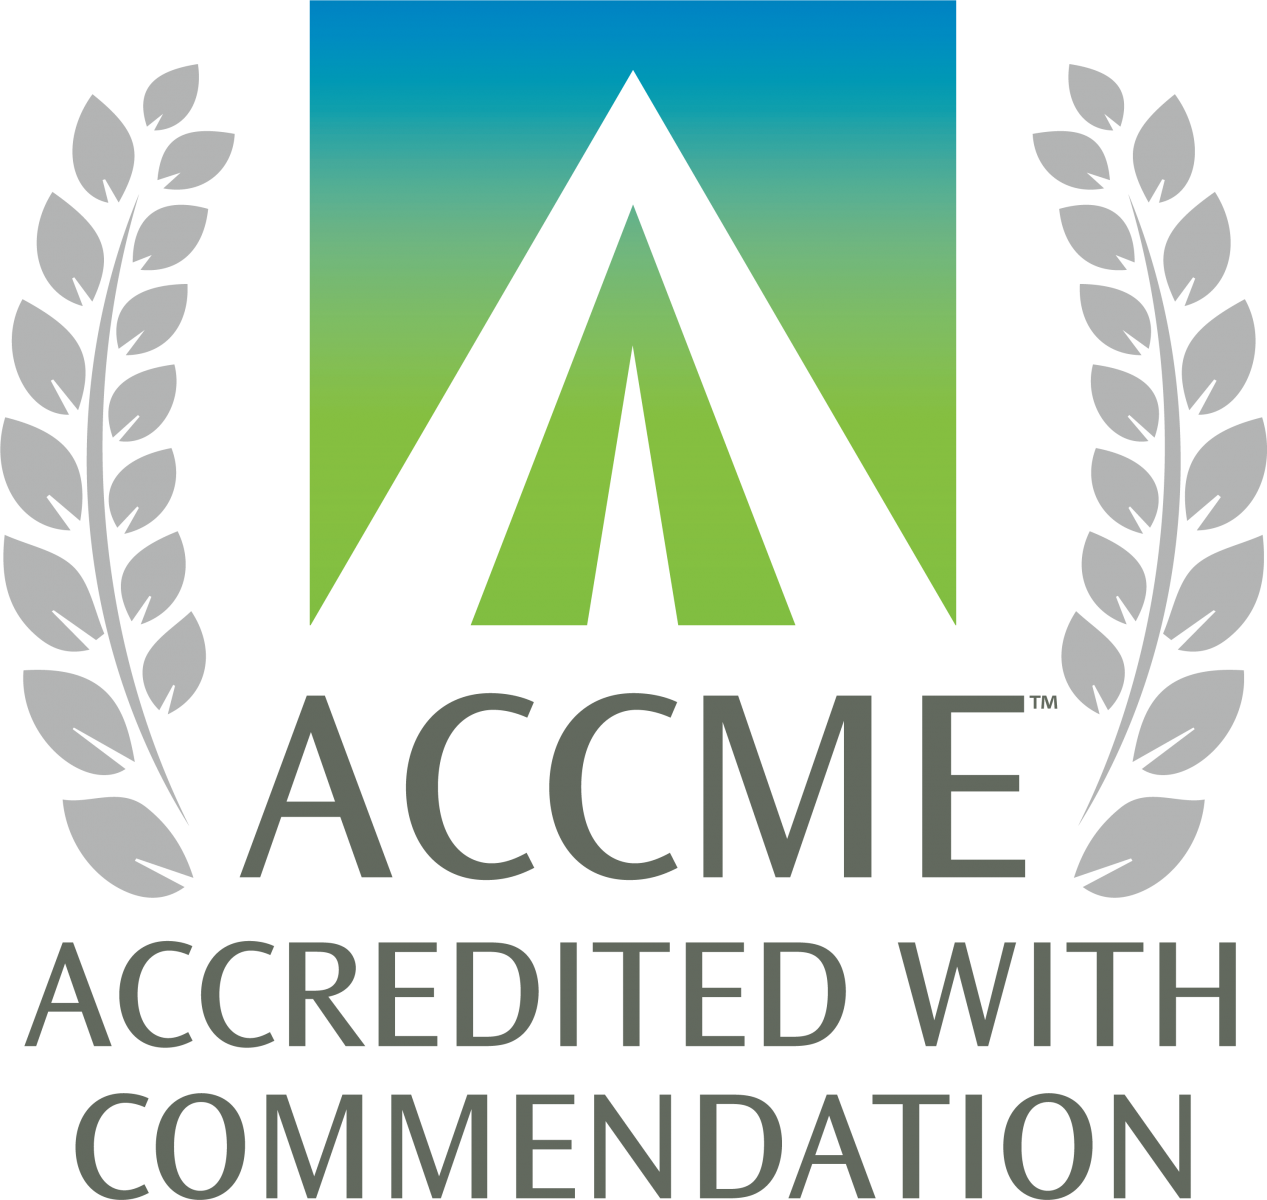 ACCME Accreditation with Commendation